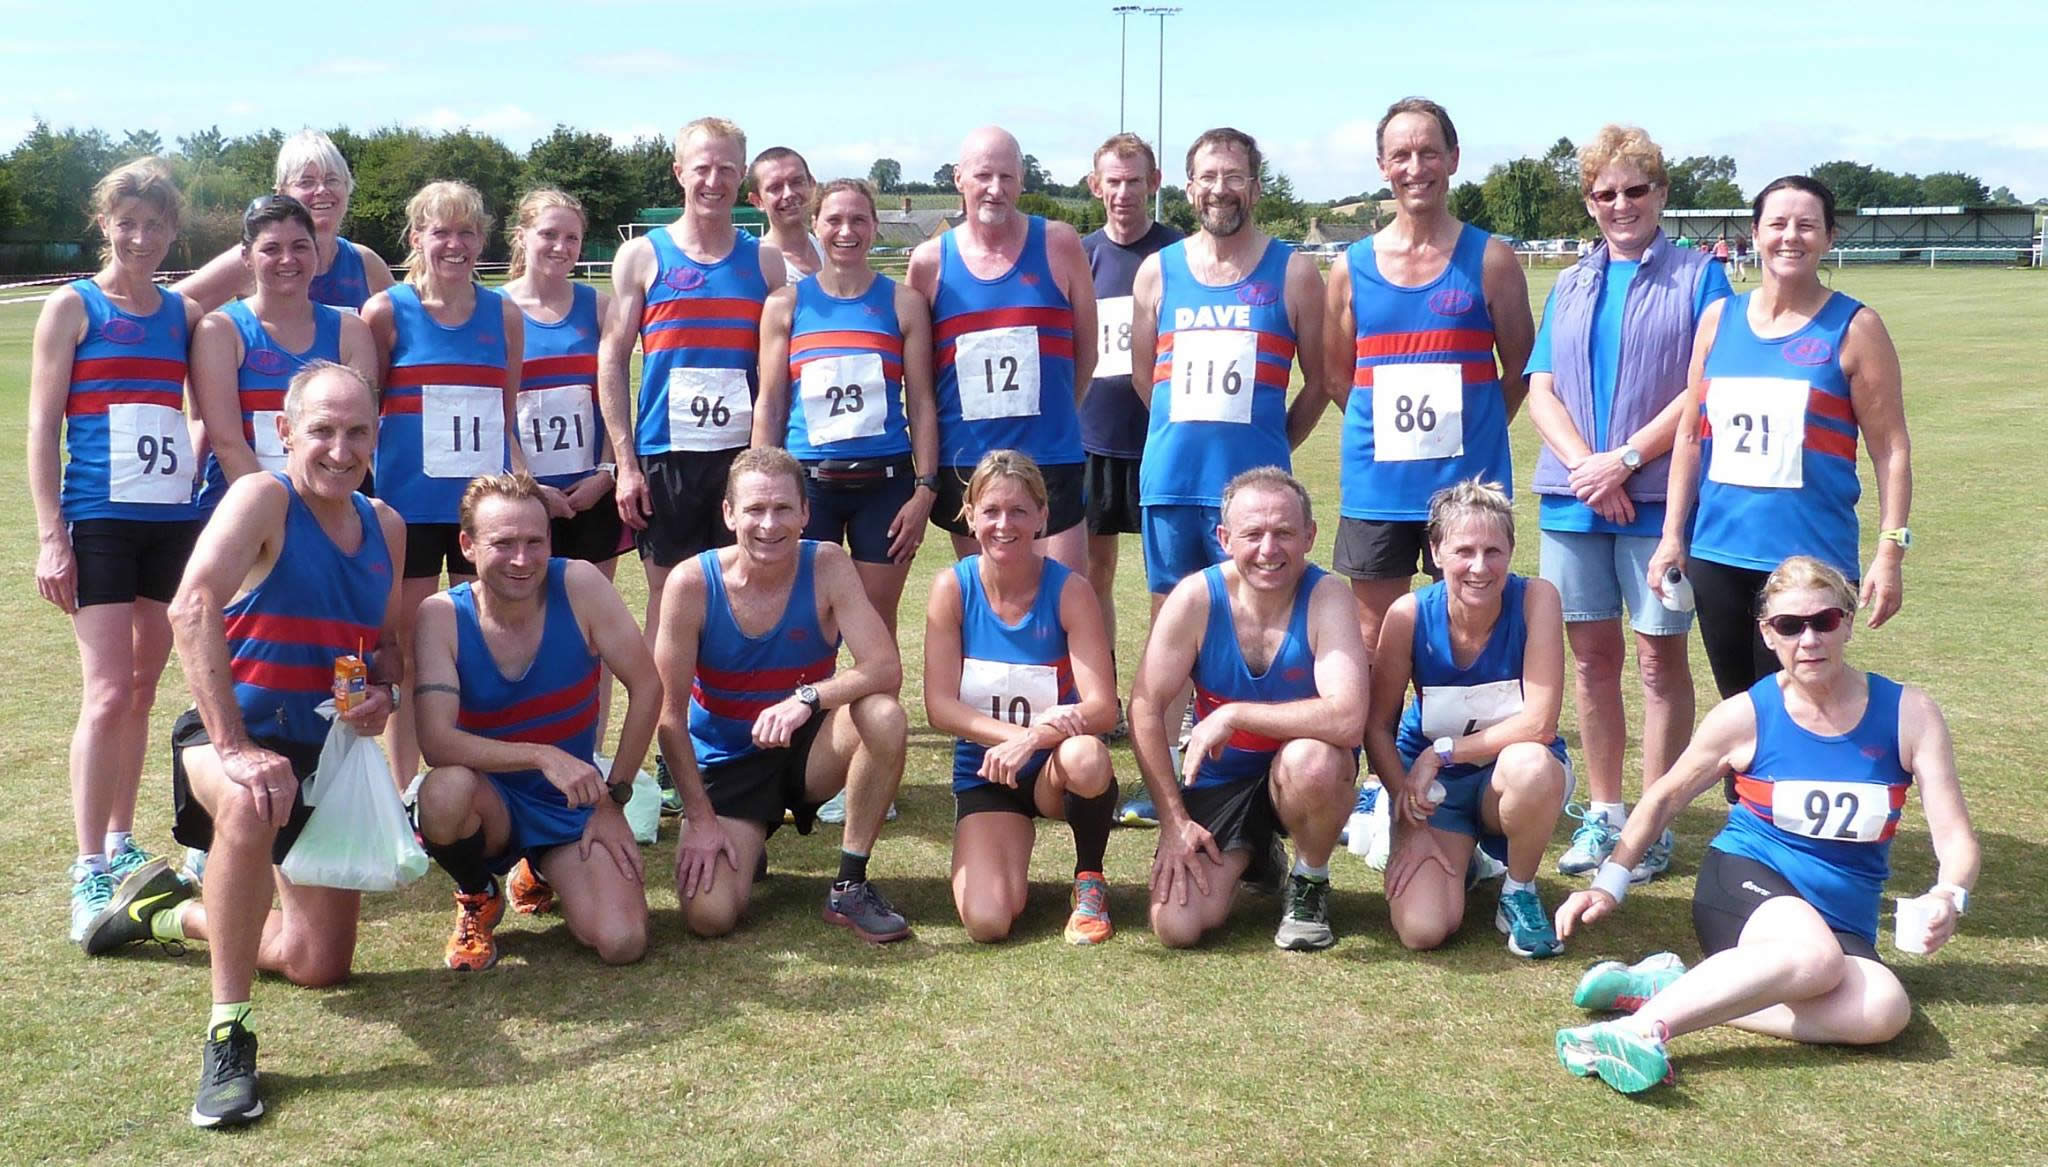 Bourton Roadrunners at the 2015 Hooky 6 race